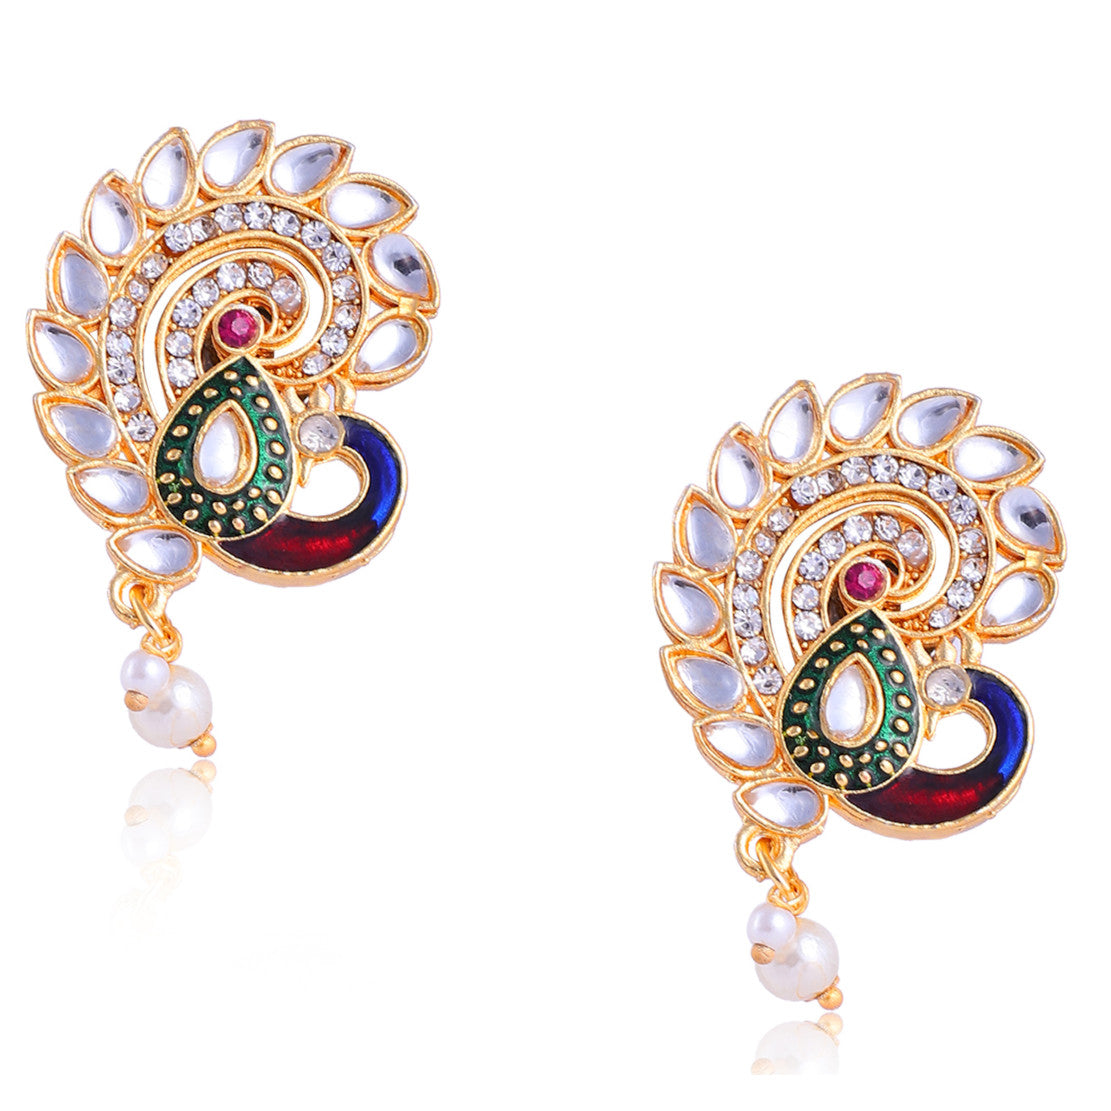 Best Traditional Designed by Handcrafted Rani Haar Necklace with Earrings for Women | Buy This Necklace Online from Mekkna